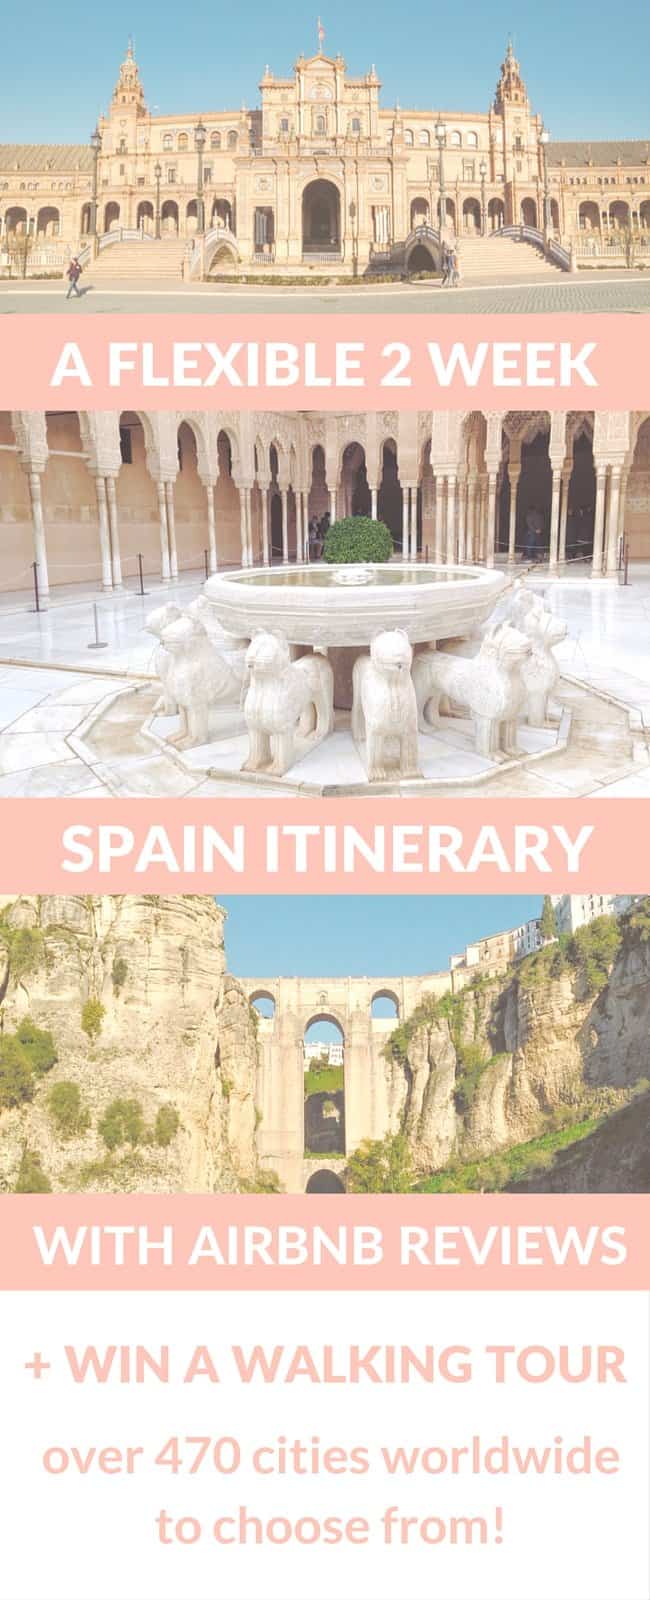 A flexible 2-3 week Spain itinerary including what to see, where to stay (actual Airbnb reviews), how to get around + other handy tips! Plus a GIVEAWAY